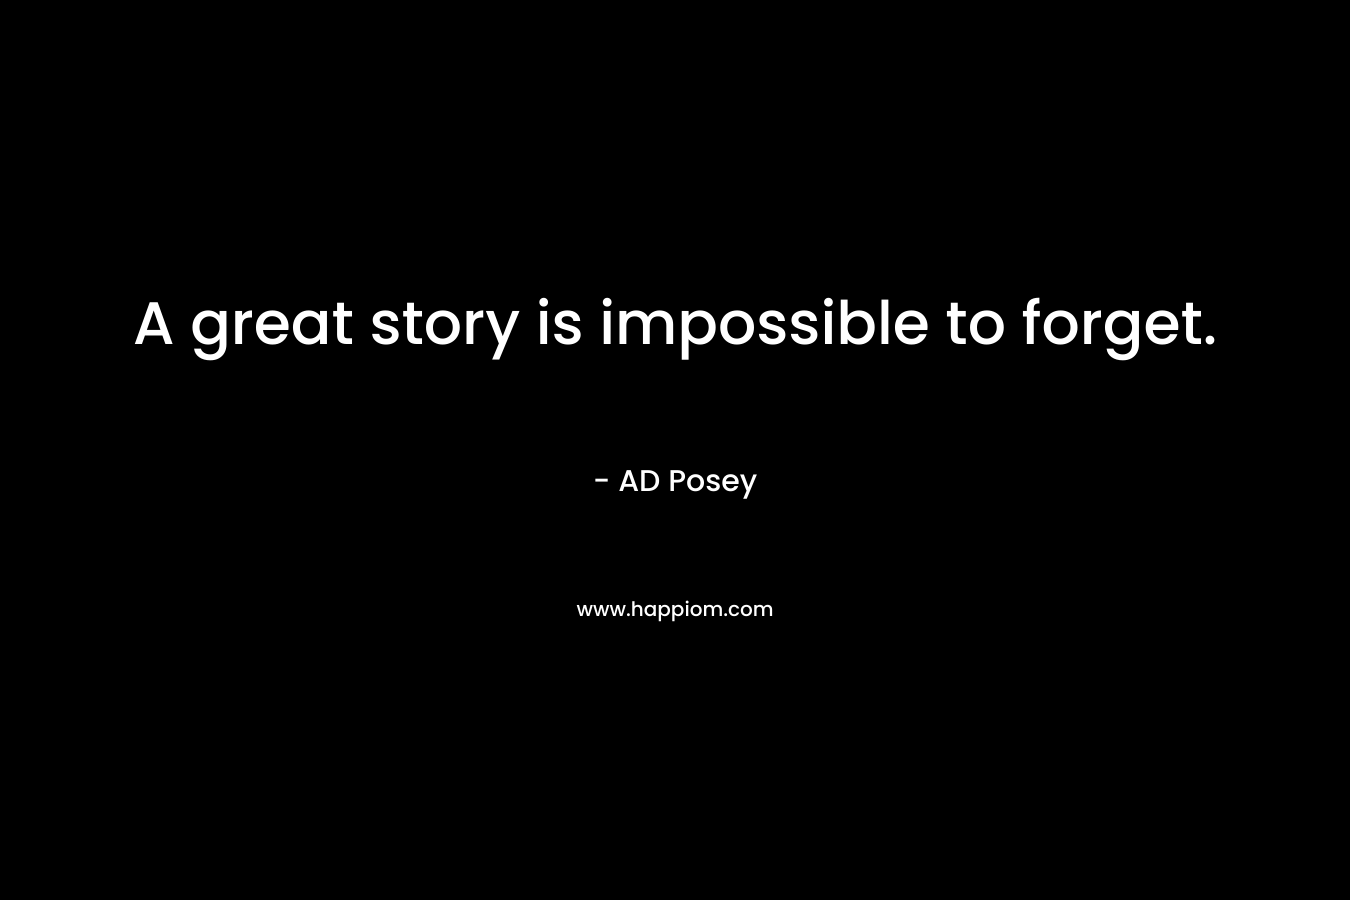 A great story is impossible to forget.